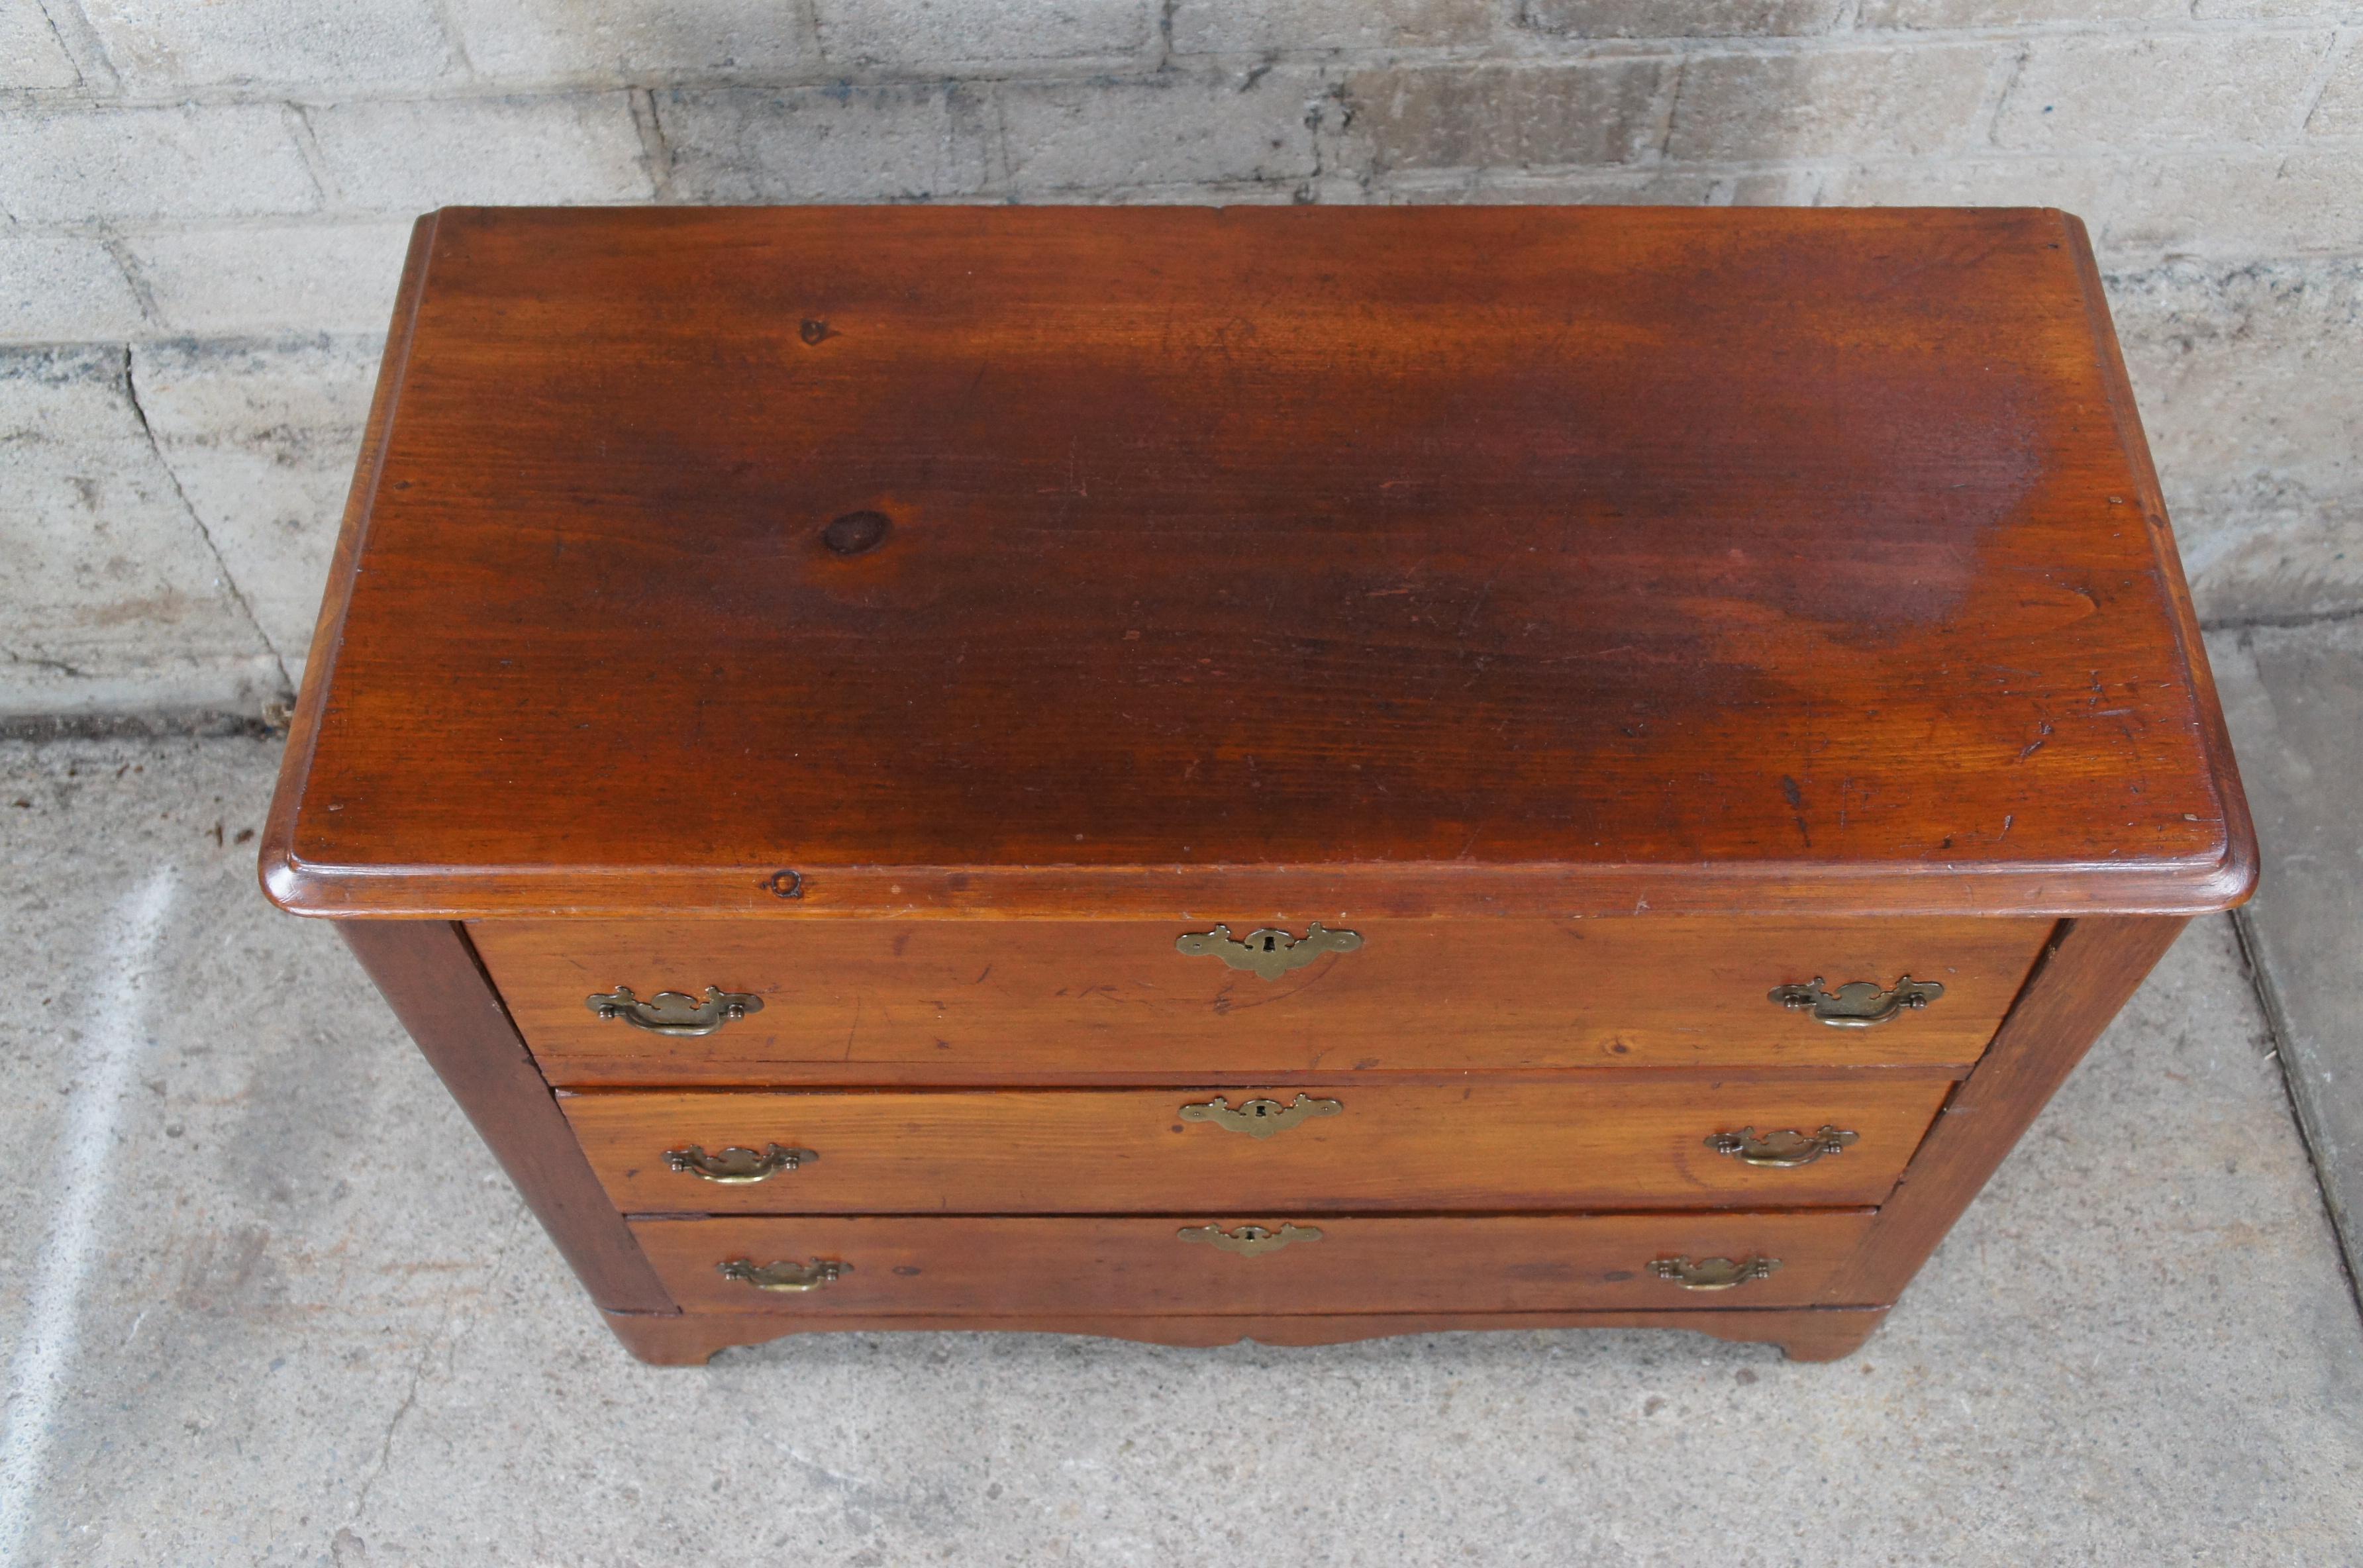 Early 20th Century Antique Early American Colonial Pine Lowboy Chest of Drawers Dresser Console